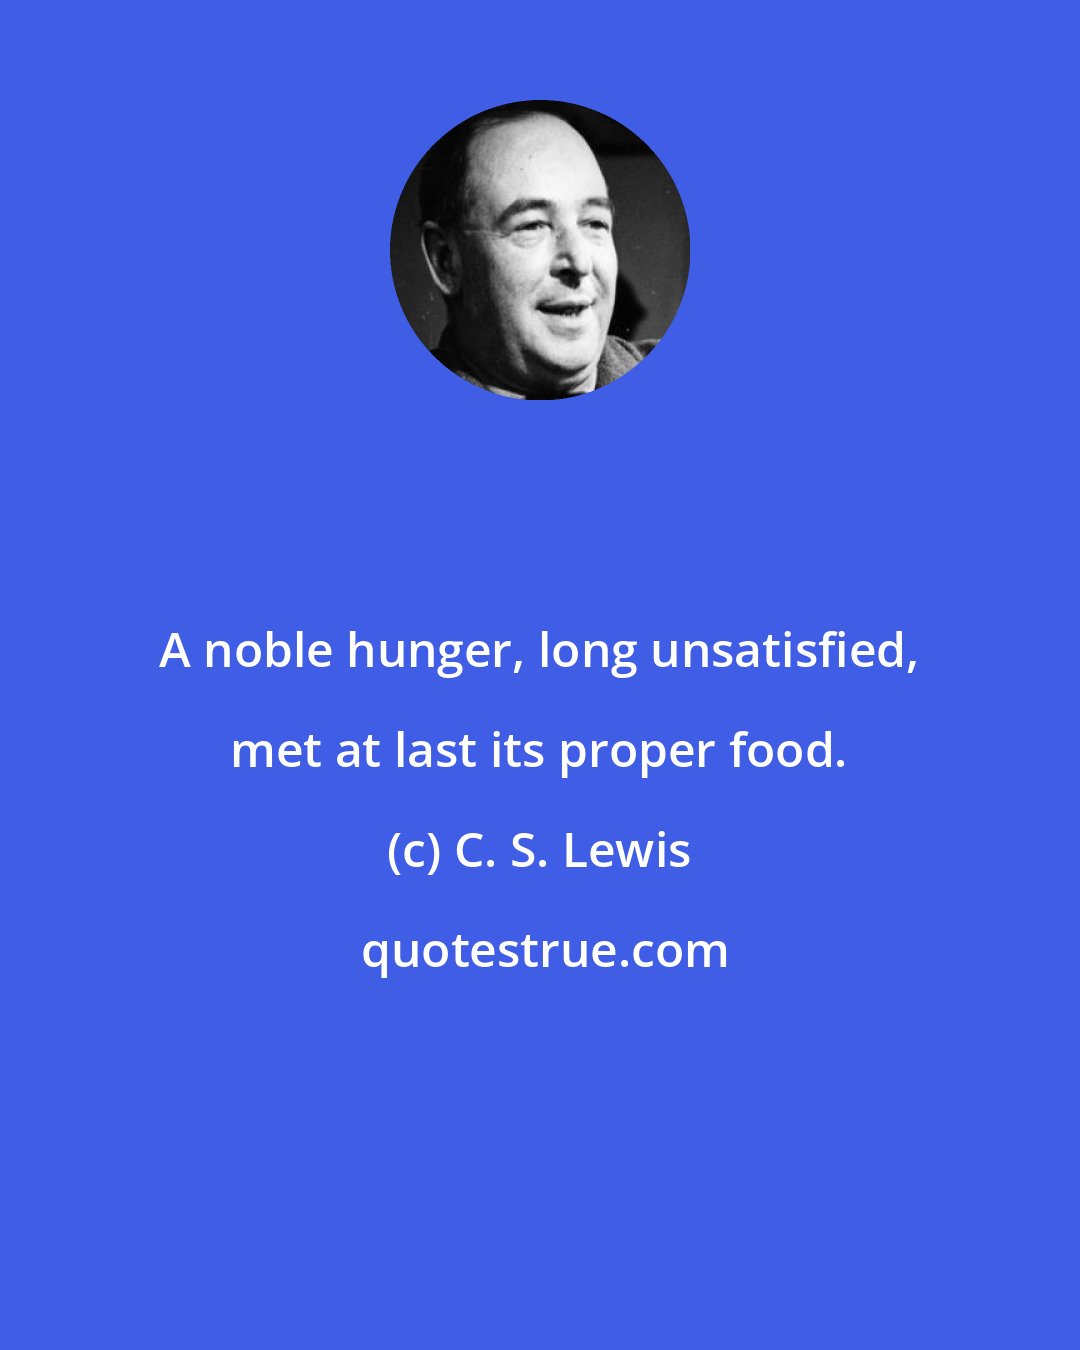 C. S. Lewis: A noble hunger, long unsatisfied, met at last its proper food.